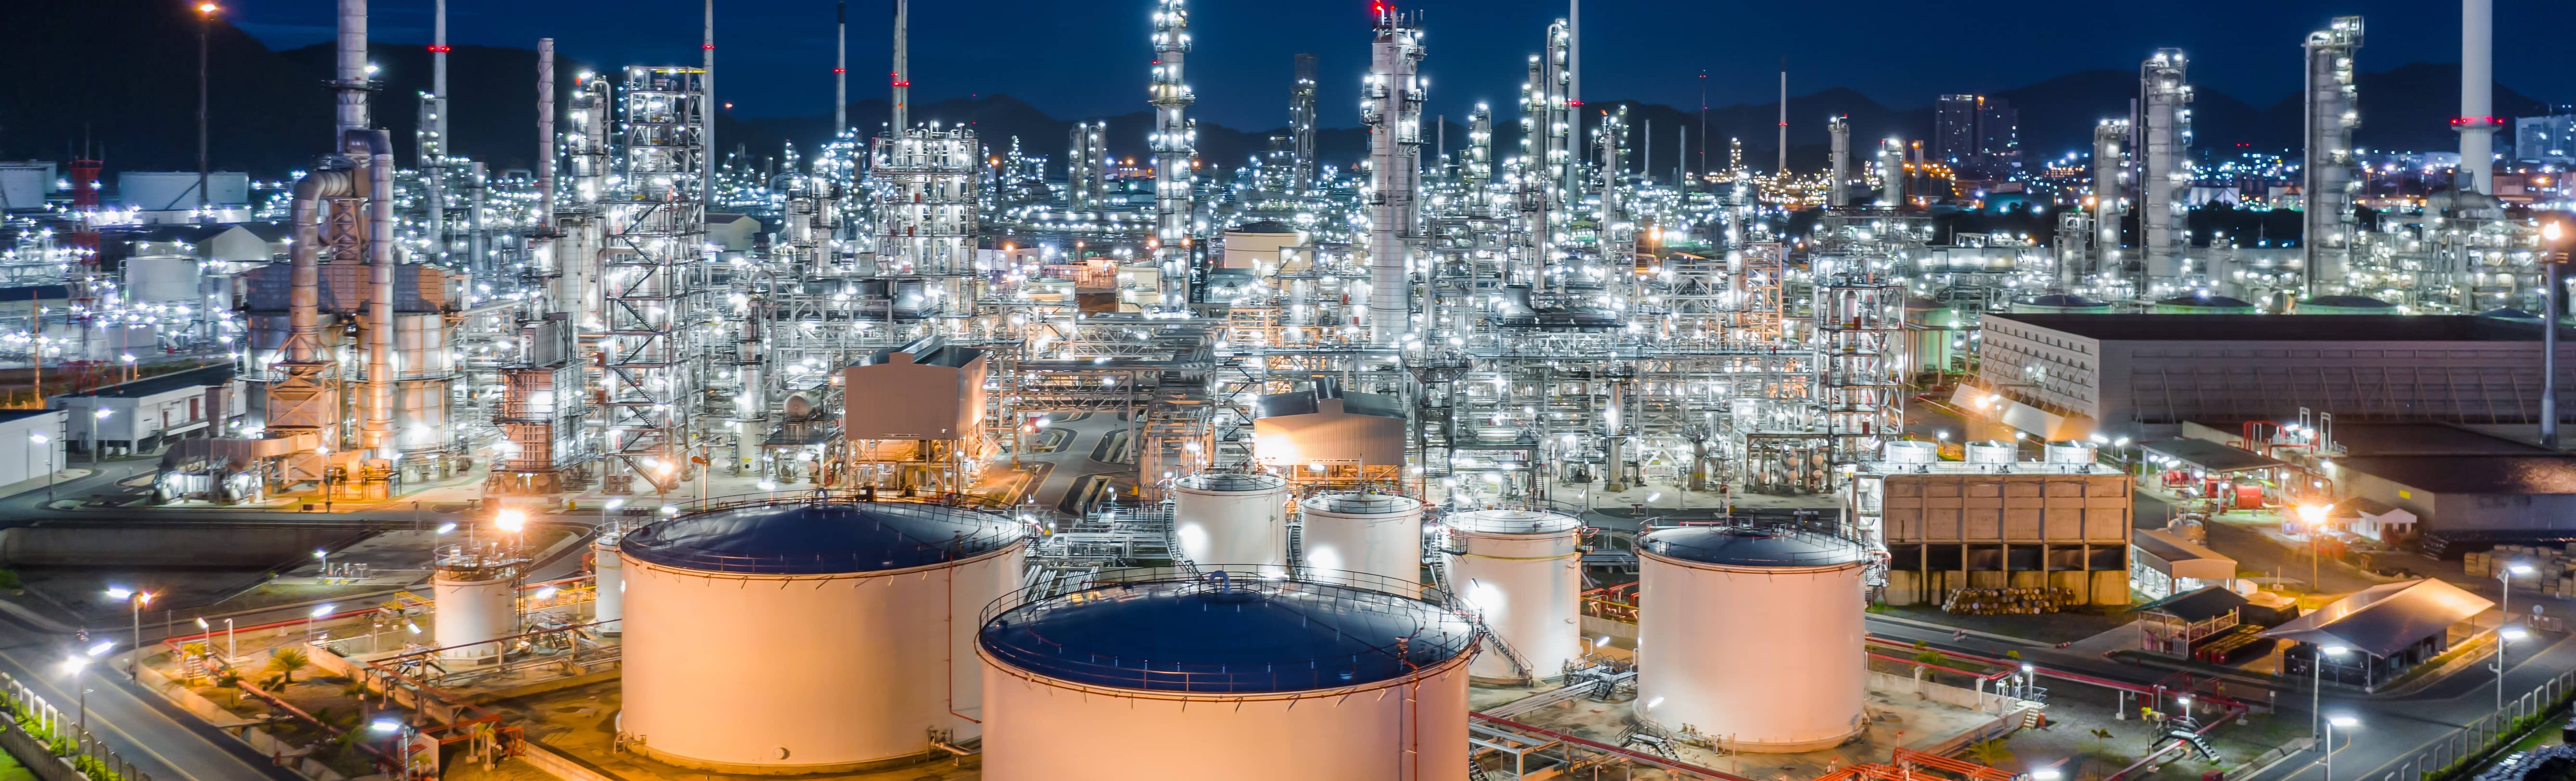 photo of oil refinery at night